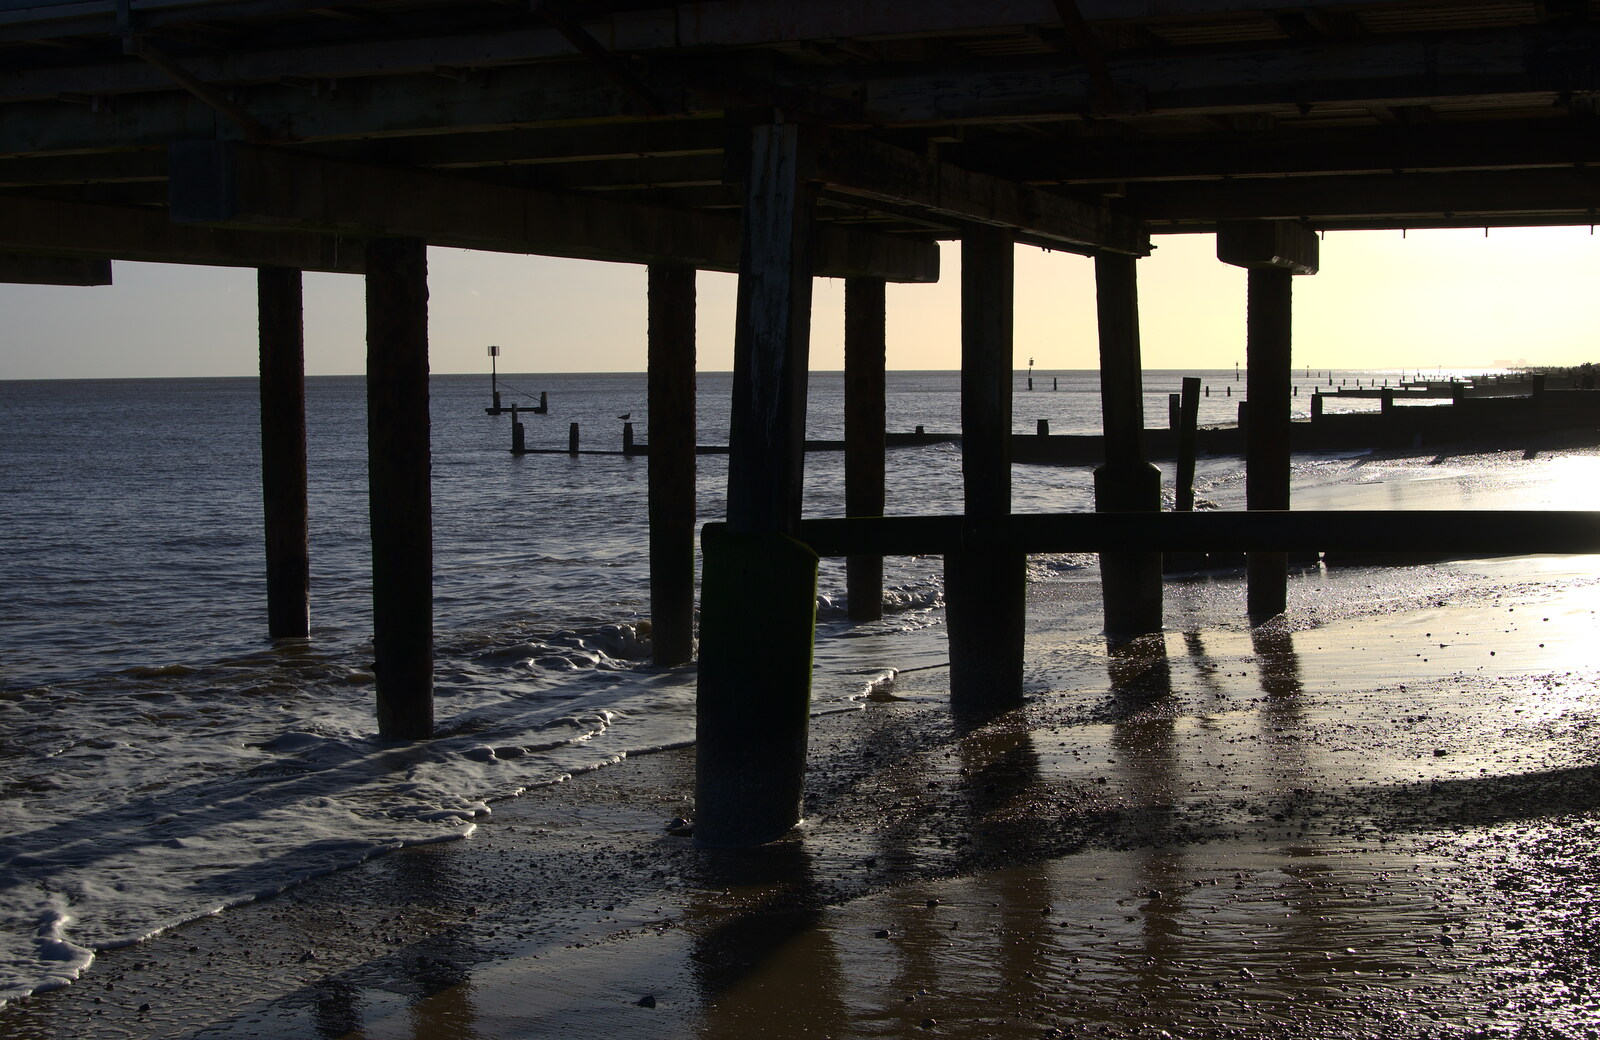 Under the pier from Boxing Day in Southwold, Suffolk - 26th December 2016